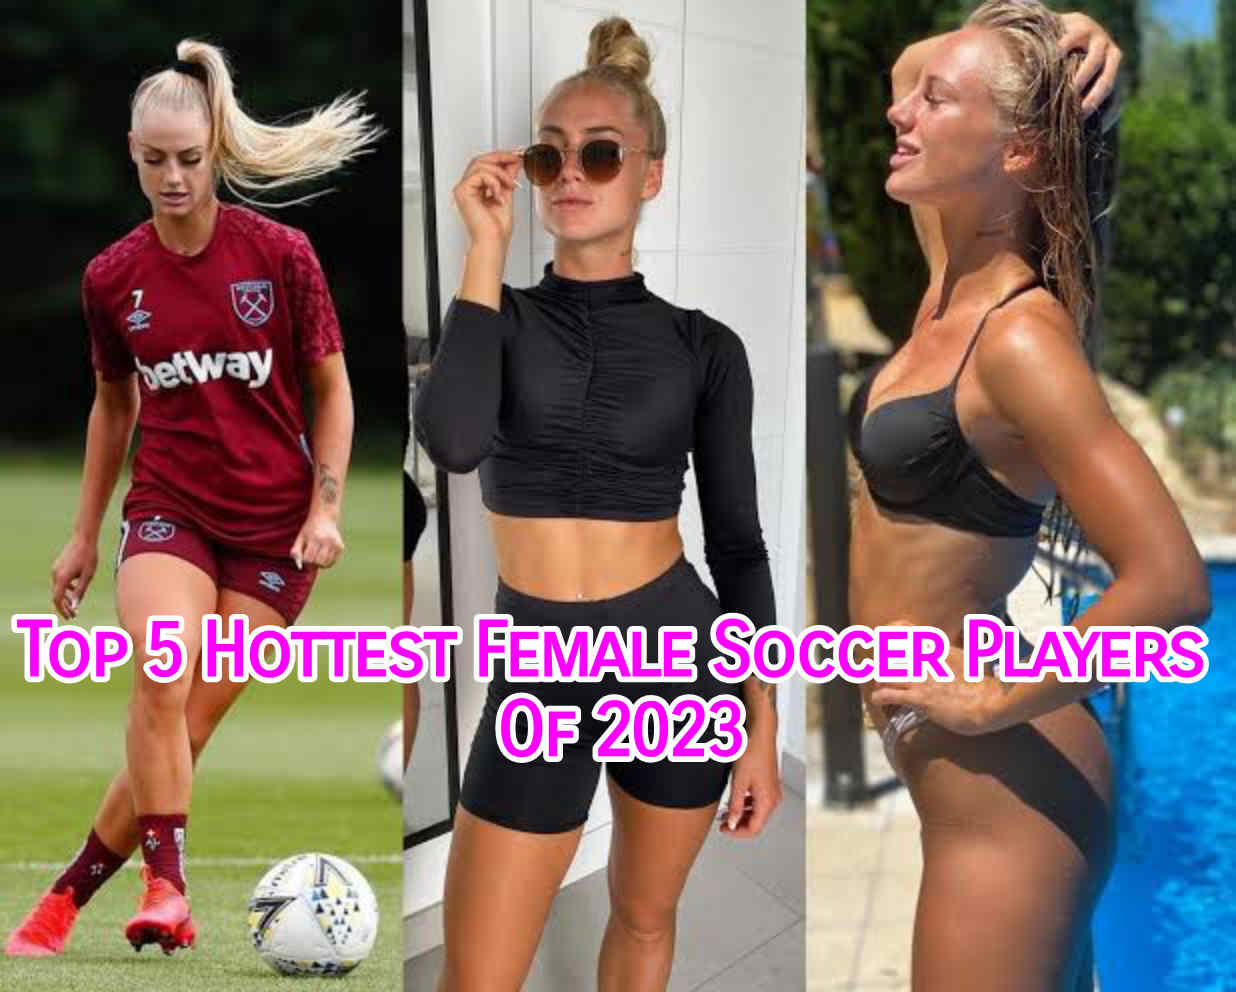 Top 5 Hottest Female Soccer Players Of 2023